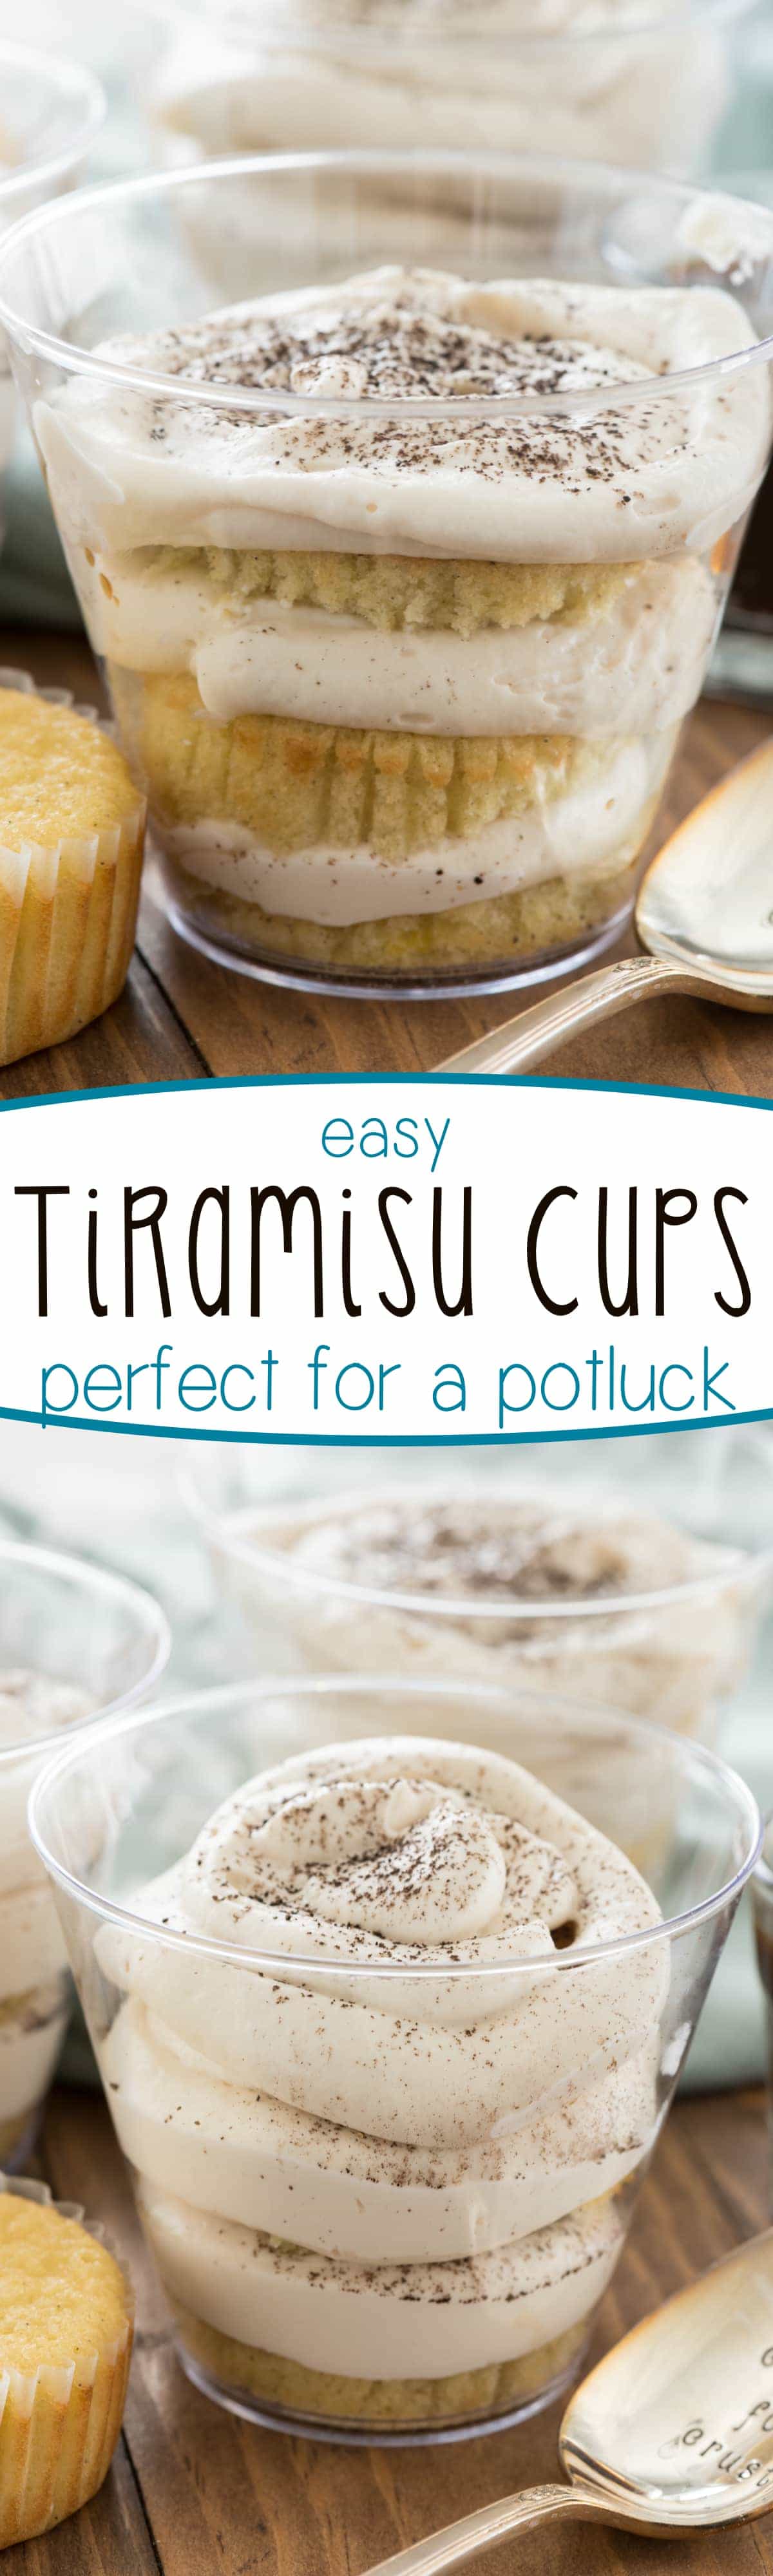 Easy Tiramisu Cups - they're perfect for a potluck! This simple tiramisu recipe uses easy to find ingredients and is packed to go in plastic cups. Genius!